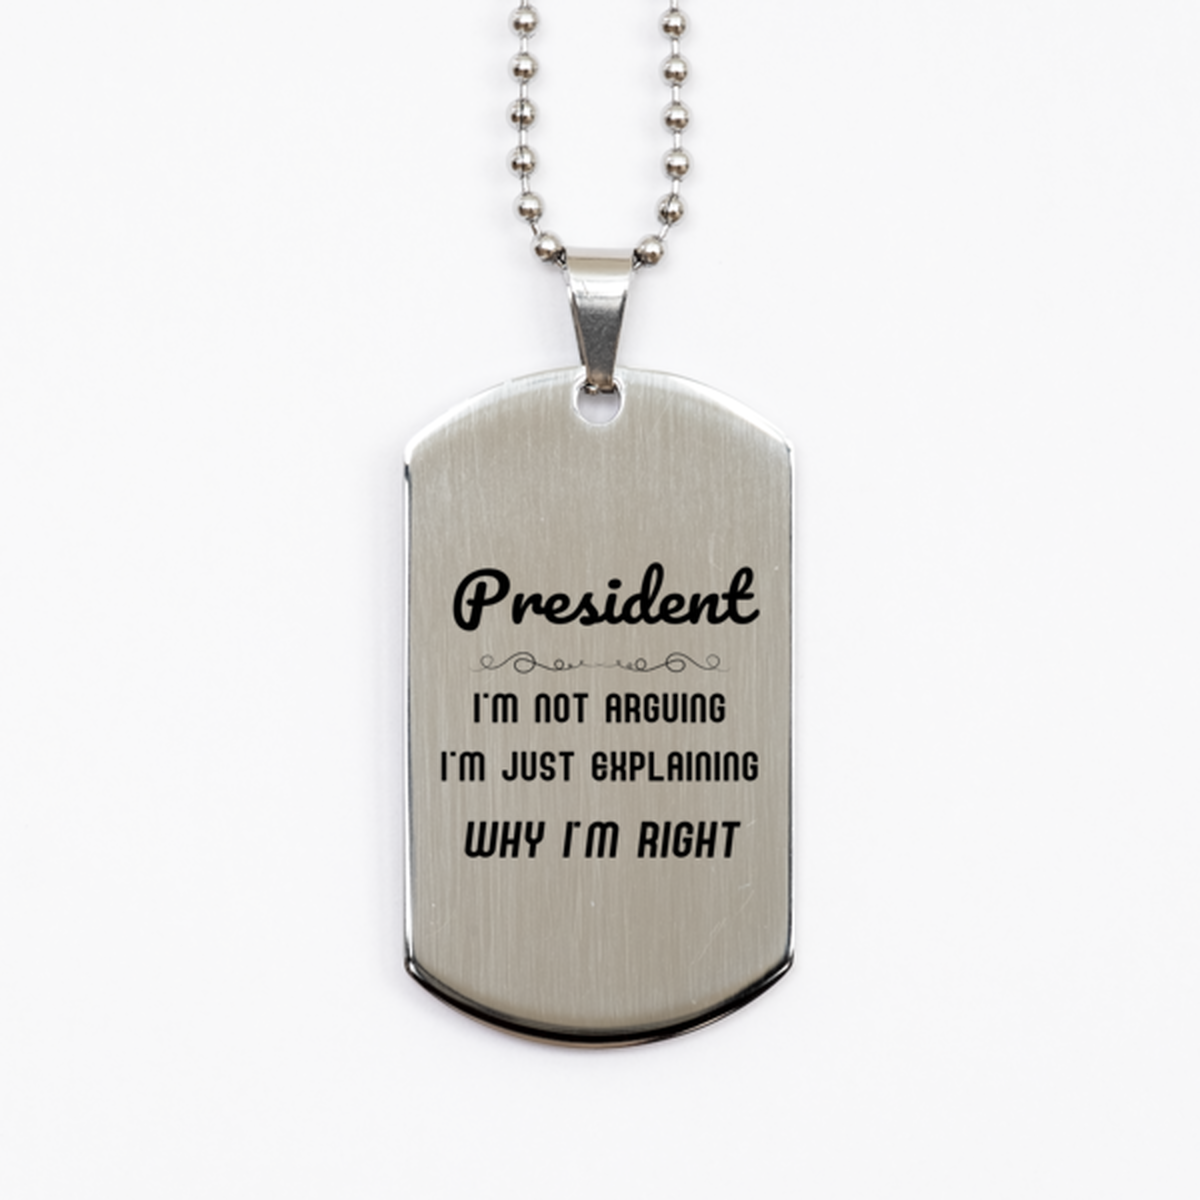 President I'm not Arguing. I'm Just Explaining Why I'm RIGHT Silver Dog Tag, Funny Saying Quote President Gifts For President Graduation Birthday Christmas Gifts for Men Women Coworker